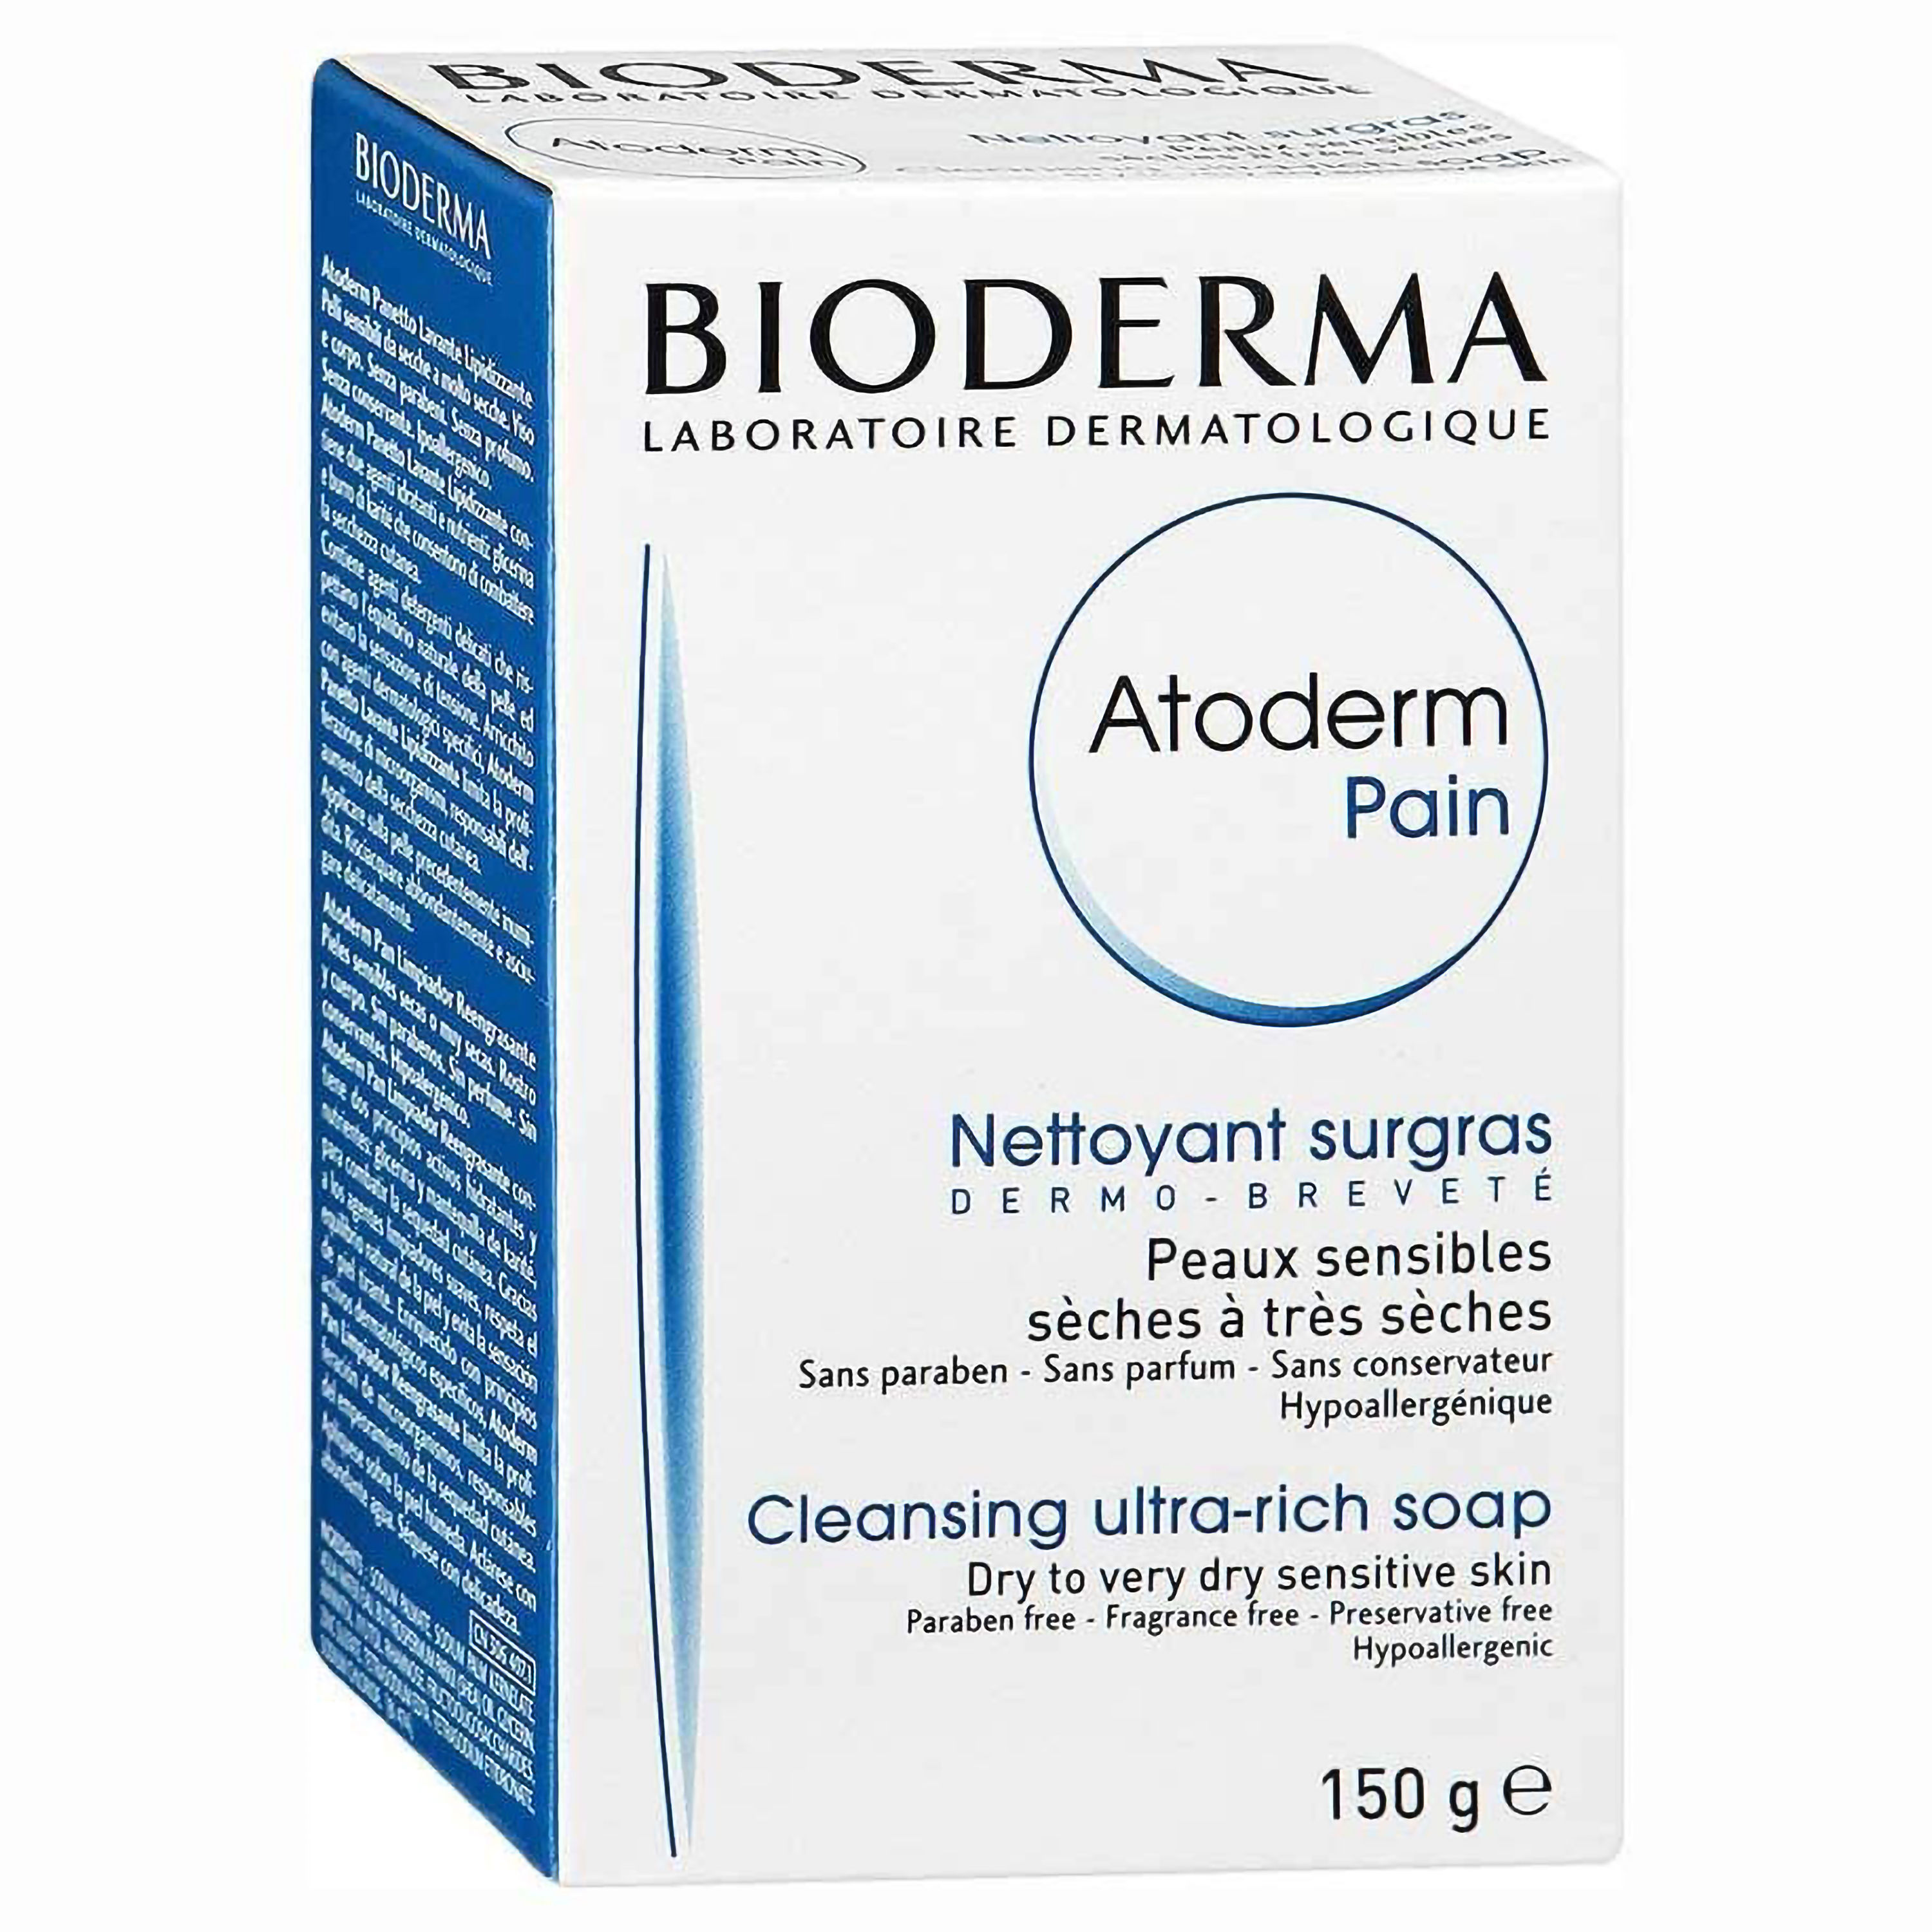 Buy Bioderma Atoderm Pain Cleansing Ultra Rich Soap 150 gm | Niacinamide, Zinc Sulphate, Copper Sulphate | Gentle Cleansing | For Dry To Very Dry Sensitive Skin Online